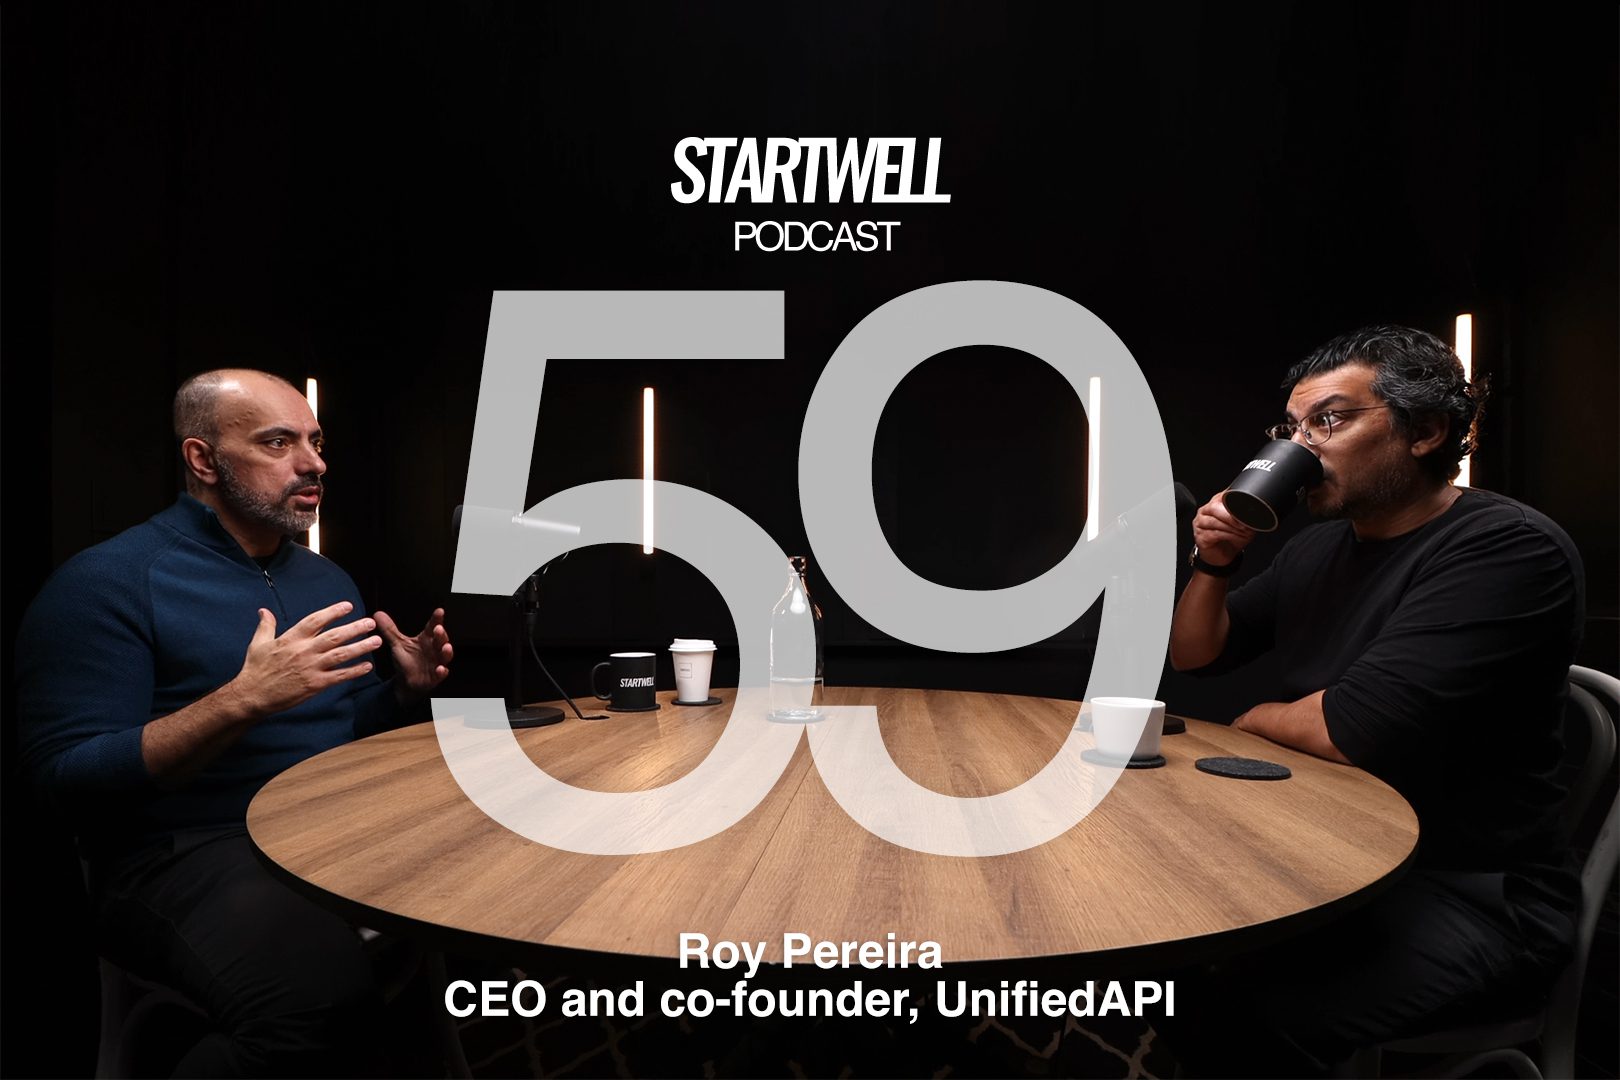 Roy Pereira on the StartWell Podcast